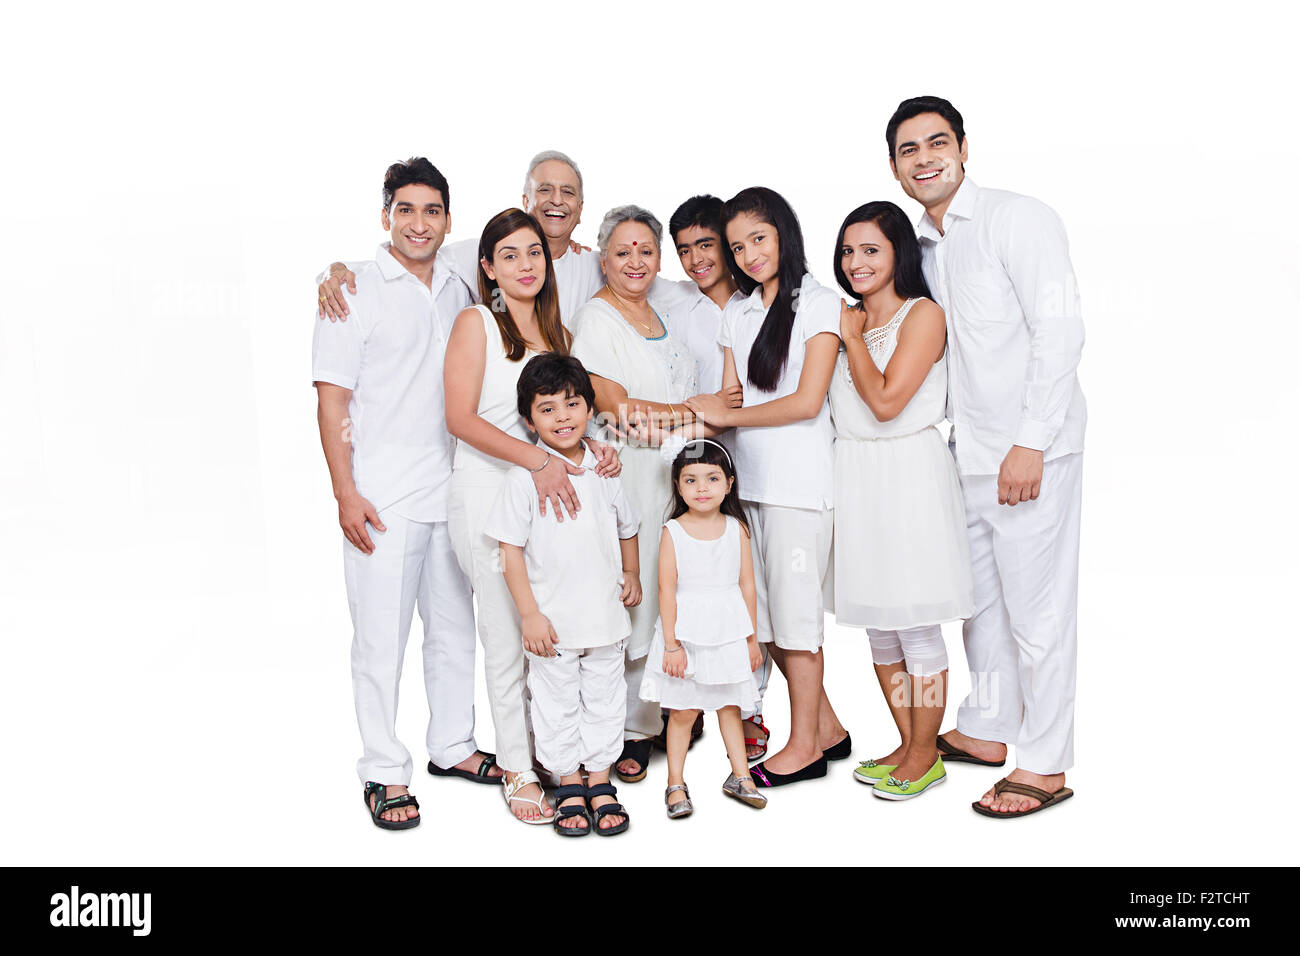 indian group Joint Family standing enjoy Stock Photo